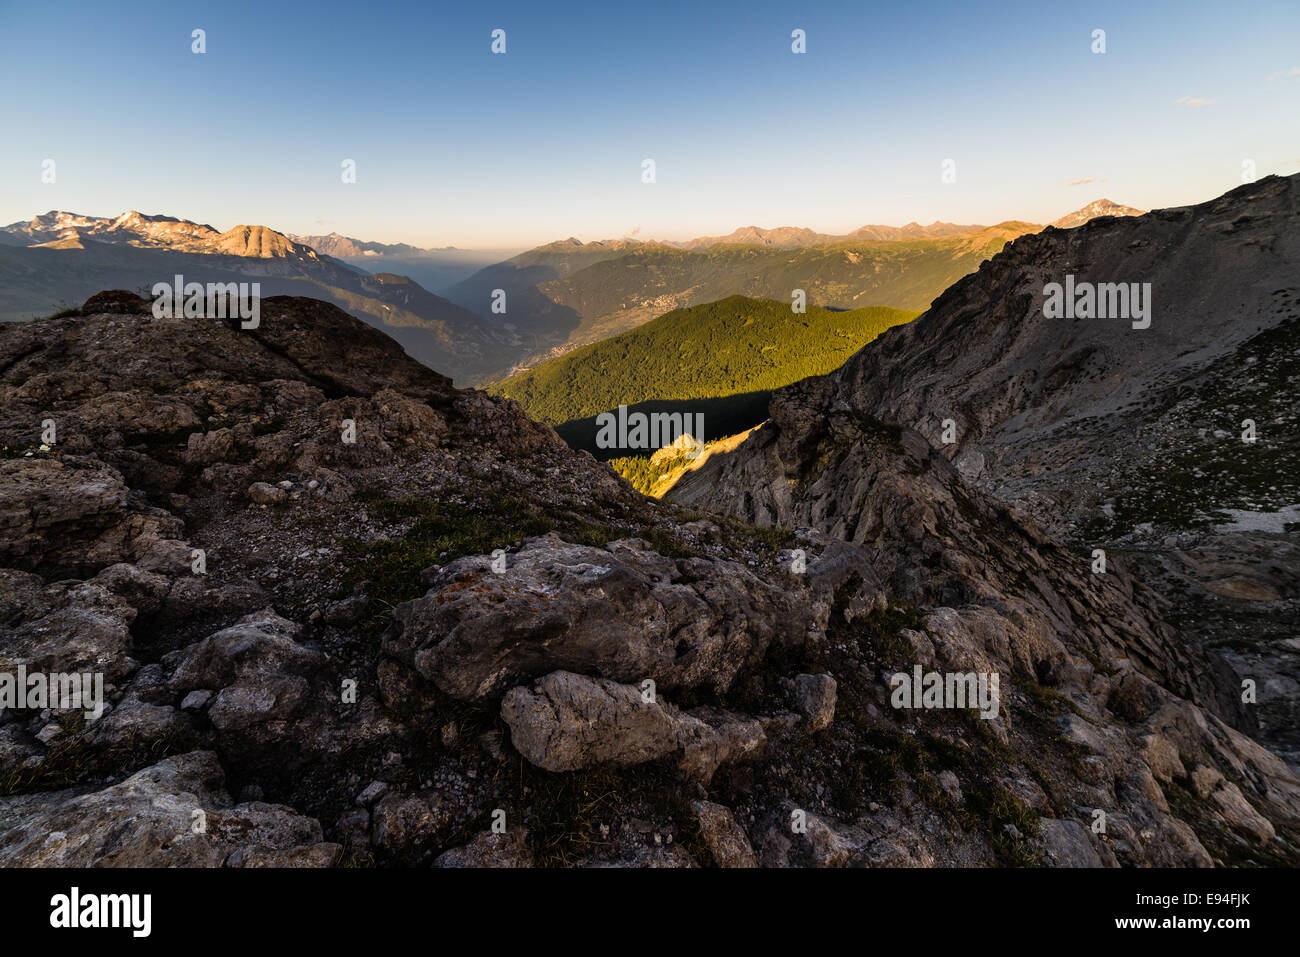 Stunning landscape at sunset on the Susa Valley from above. Stock Photo